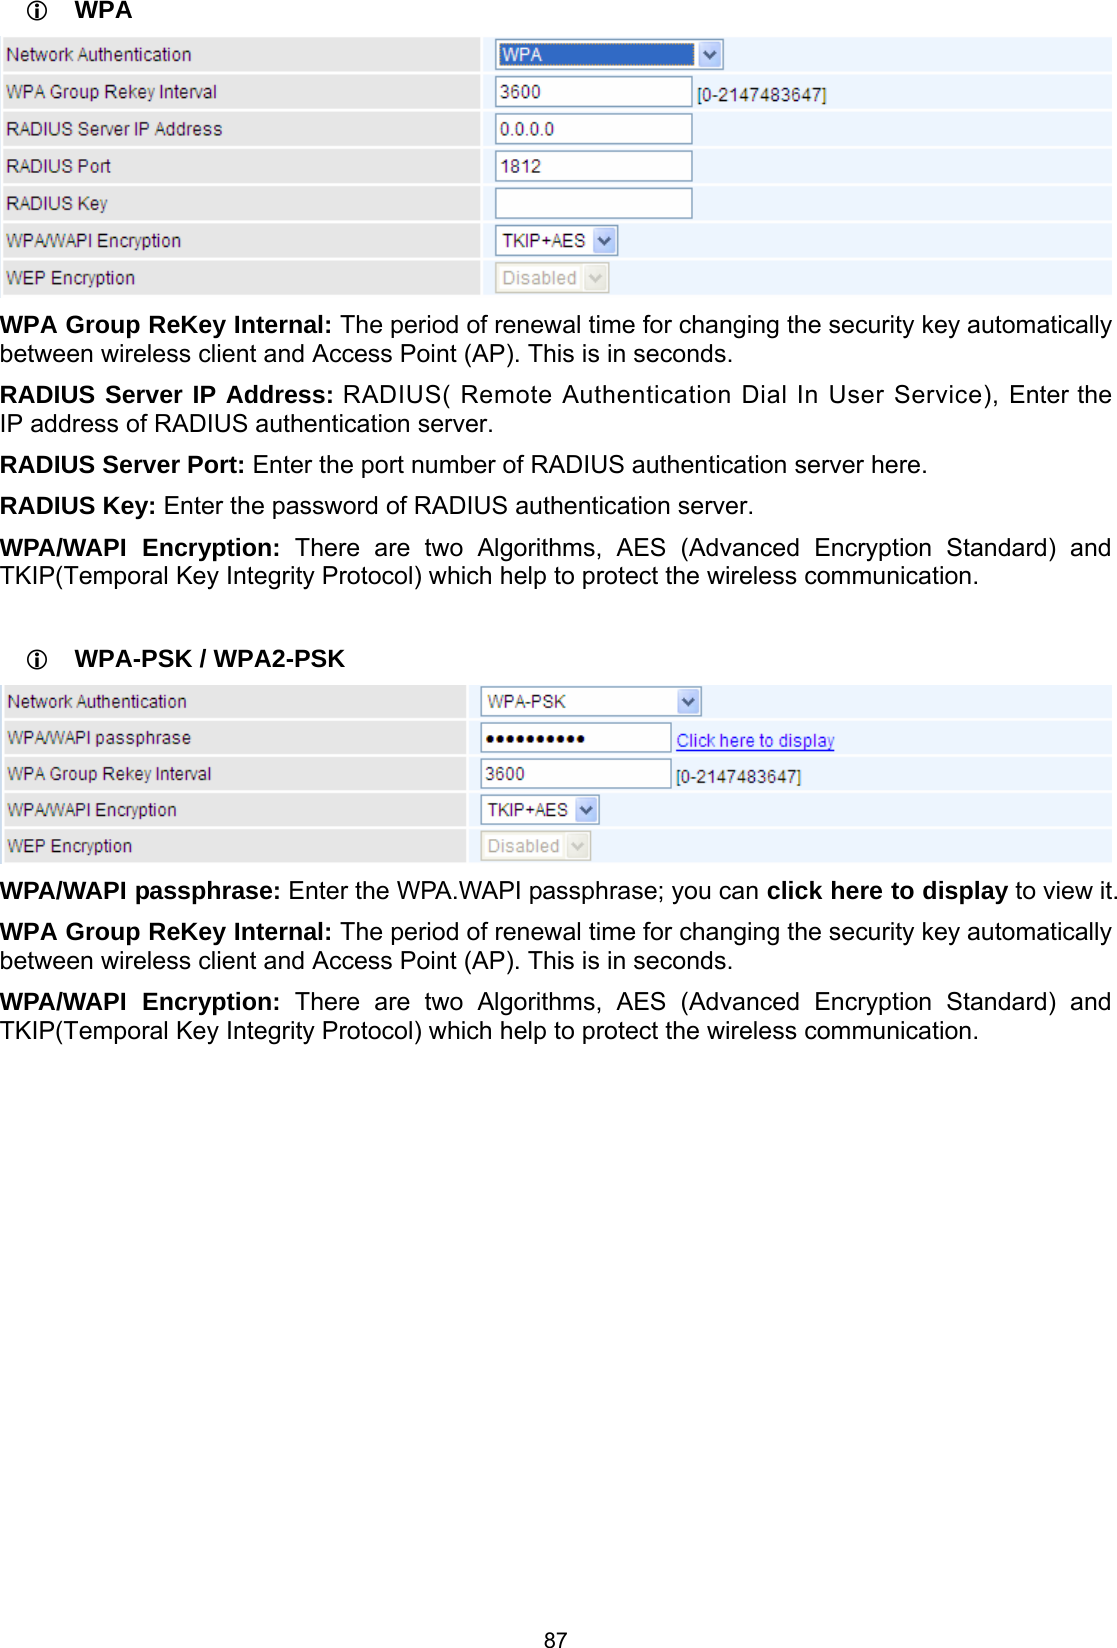  87  WPA  WPA Group ReKey Internal: The period of renewal time for changing the security key automatically between wireless client and Access Point (AP). This is in seconds. RADIUS Server IP Address: RADIUS( Remote Authentication Dial In User Service), Enter the IP address of RADIUS authentication server. RADIUS Server Port: Enter the port number of RADIUS authentication server here. RADIUS Key: Enter the password of RADIUS authentication server. WPA/WAPI Encryption: There are two Algorithms, AES (Advanced Encryption Standard) and TKIP(Temporal Key Integrity Protocol) which help to protect the wireless communication.   WPA-PSK / WPA2-PSK  WPA/WAPI passphrase: Enter the WPA.WAPI passphrase; you can click here to display to view it. WPA Group ReKey Internal: The period of renewal time for changing the security key automatically between wireless client and Access Point (AP). This is in seconds. WPA/WAPI Encryption: There are two Algorithms, AES (Advanced Encryption Standard) and TKIP(Temporal Key Integrity Protocol) which help to protect the wireless communication.              